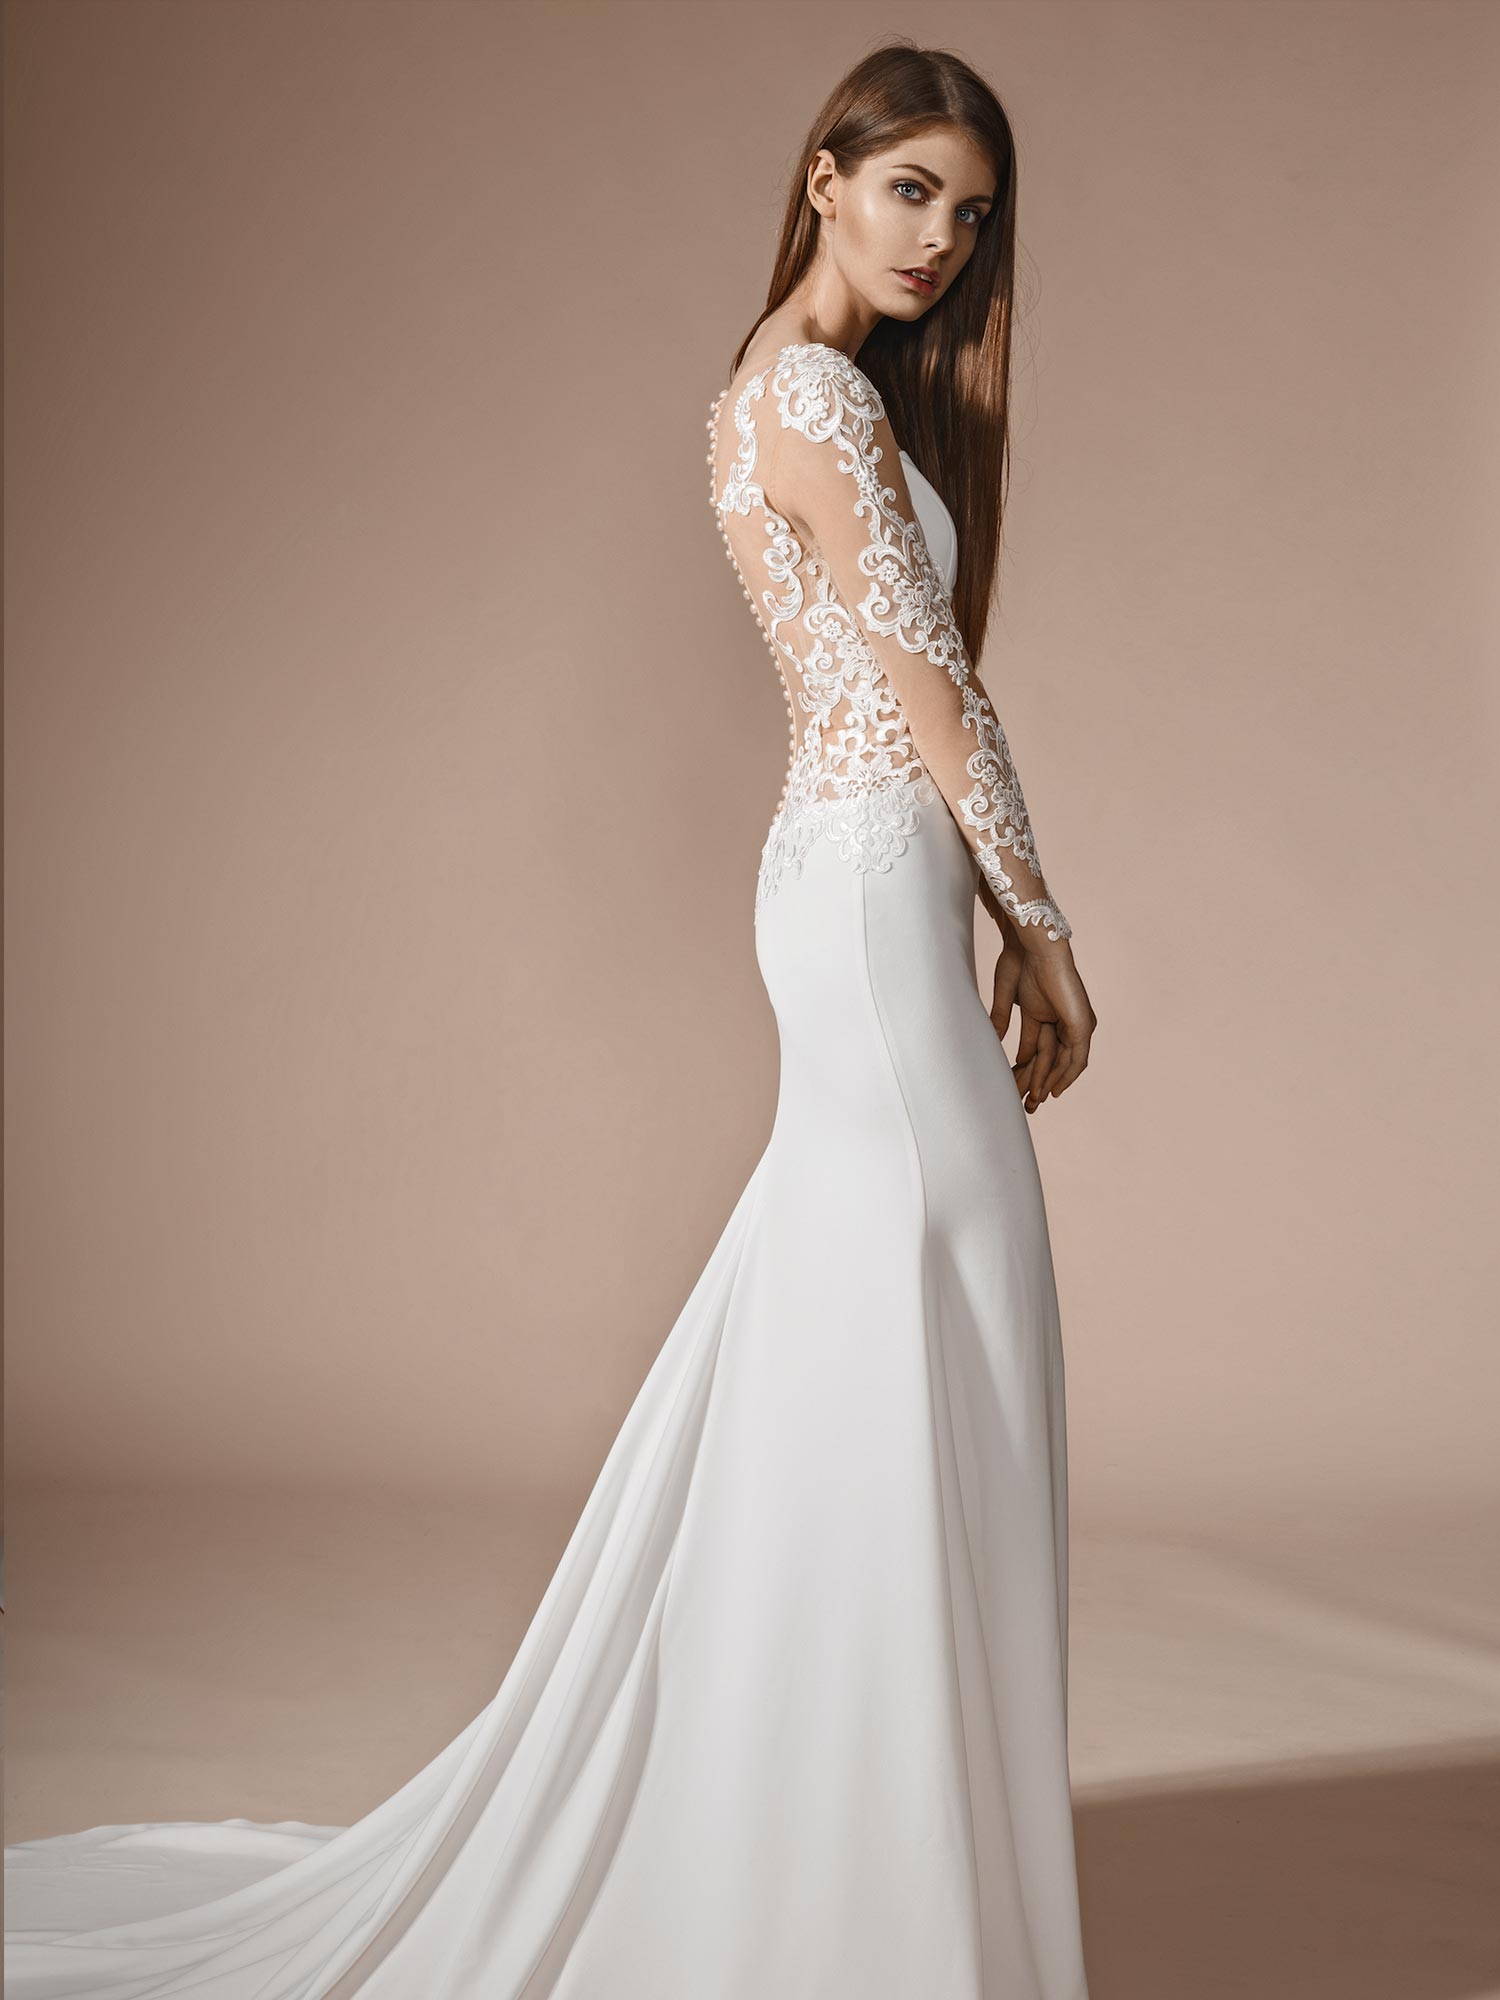 Papilio Fit and flare style wedding dress with illusion neckline and